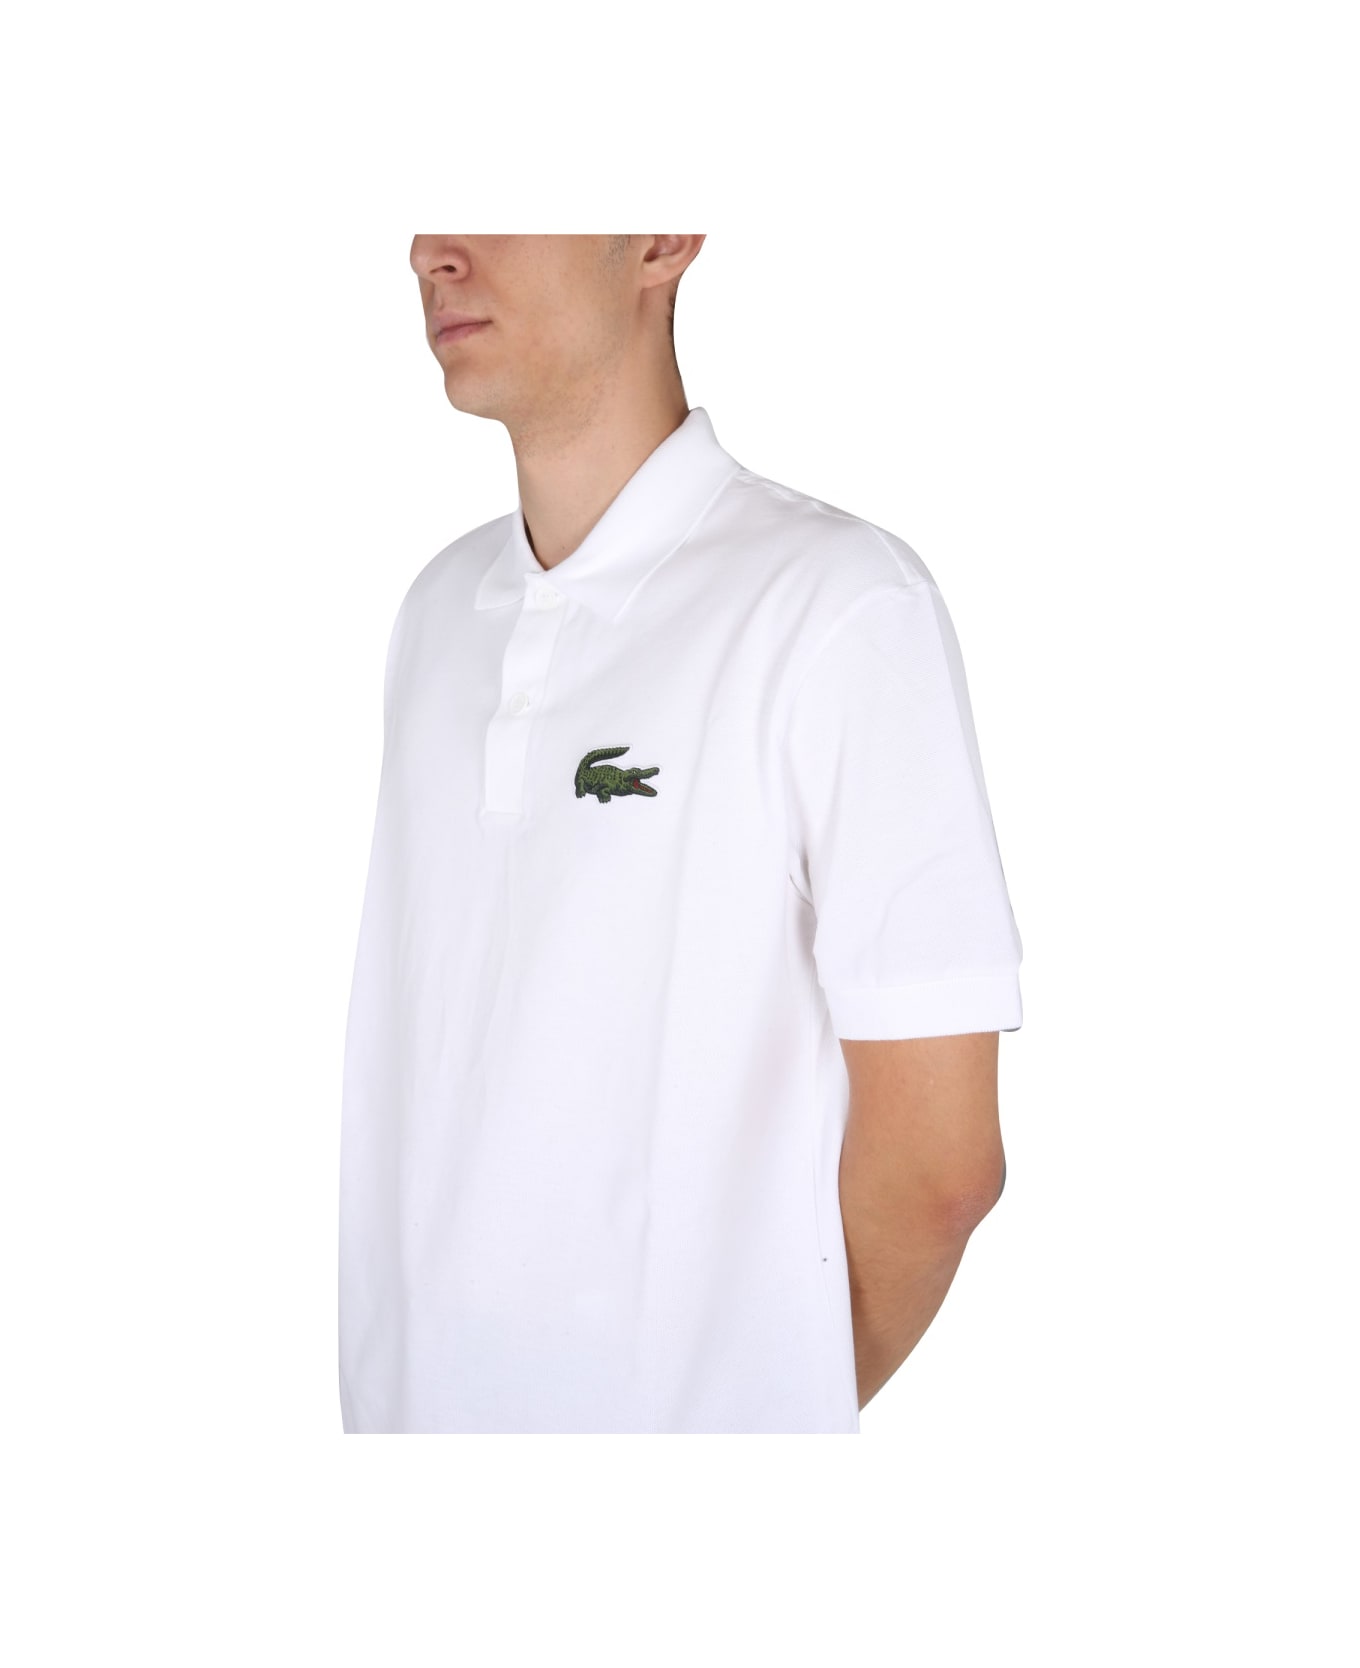 Lacoste Loose Fit Polo. - White name:472